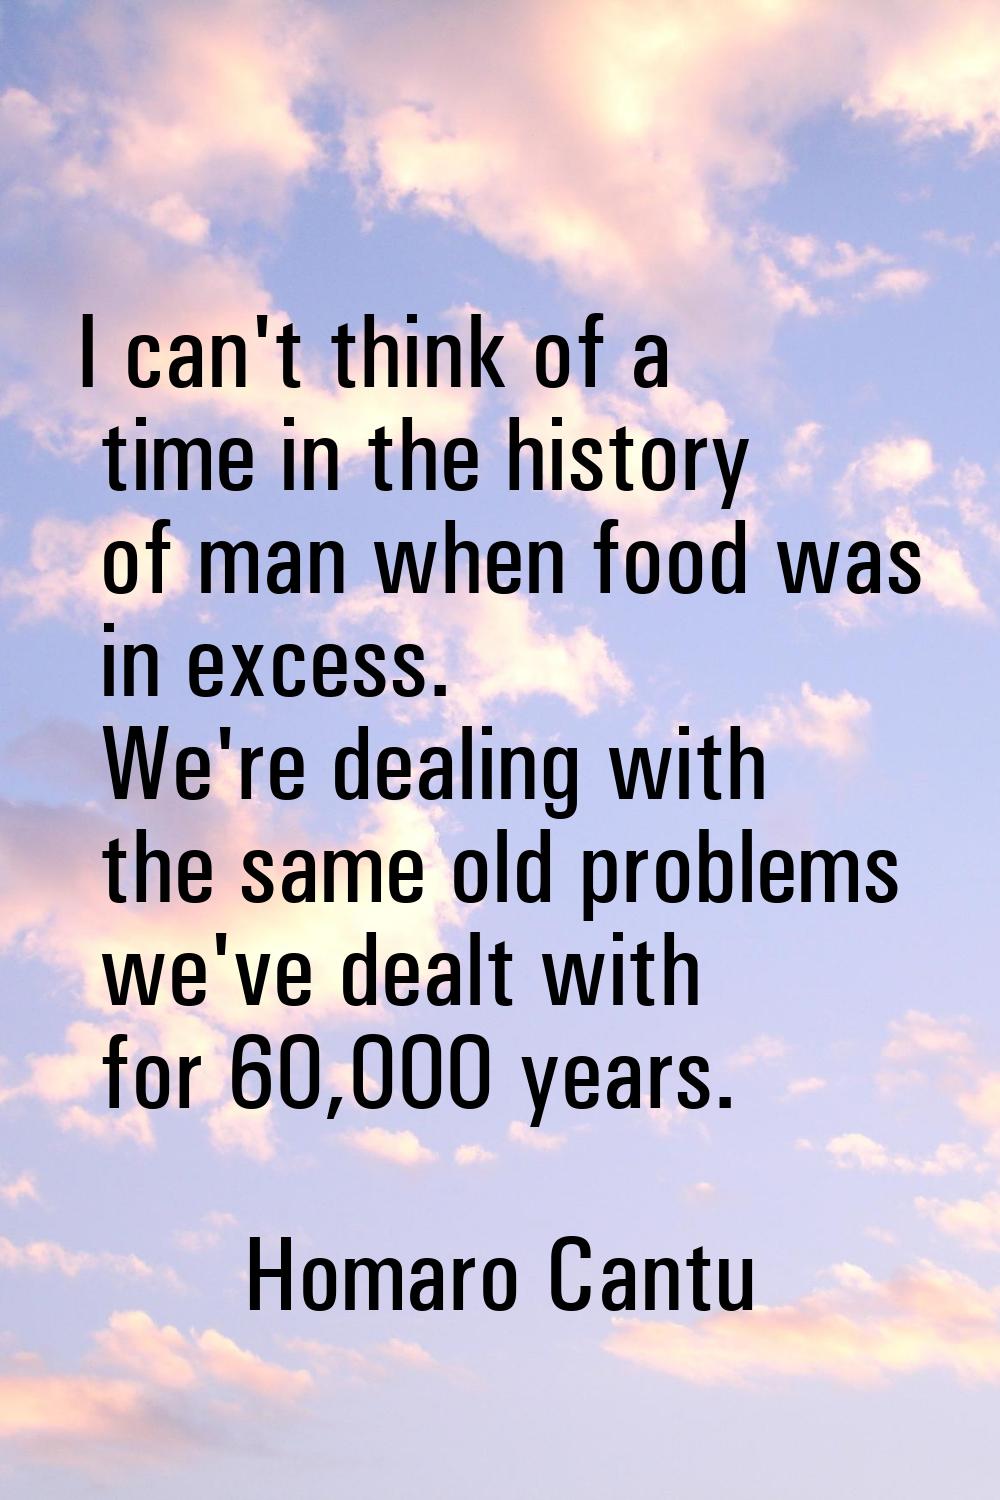 I can't think of a time in the history of man when food was in excess. We're dealing with the same 